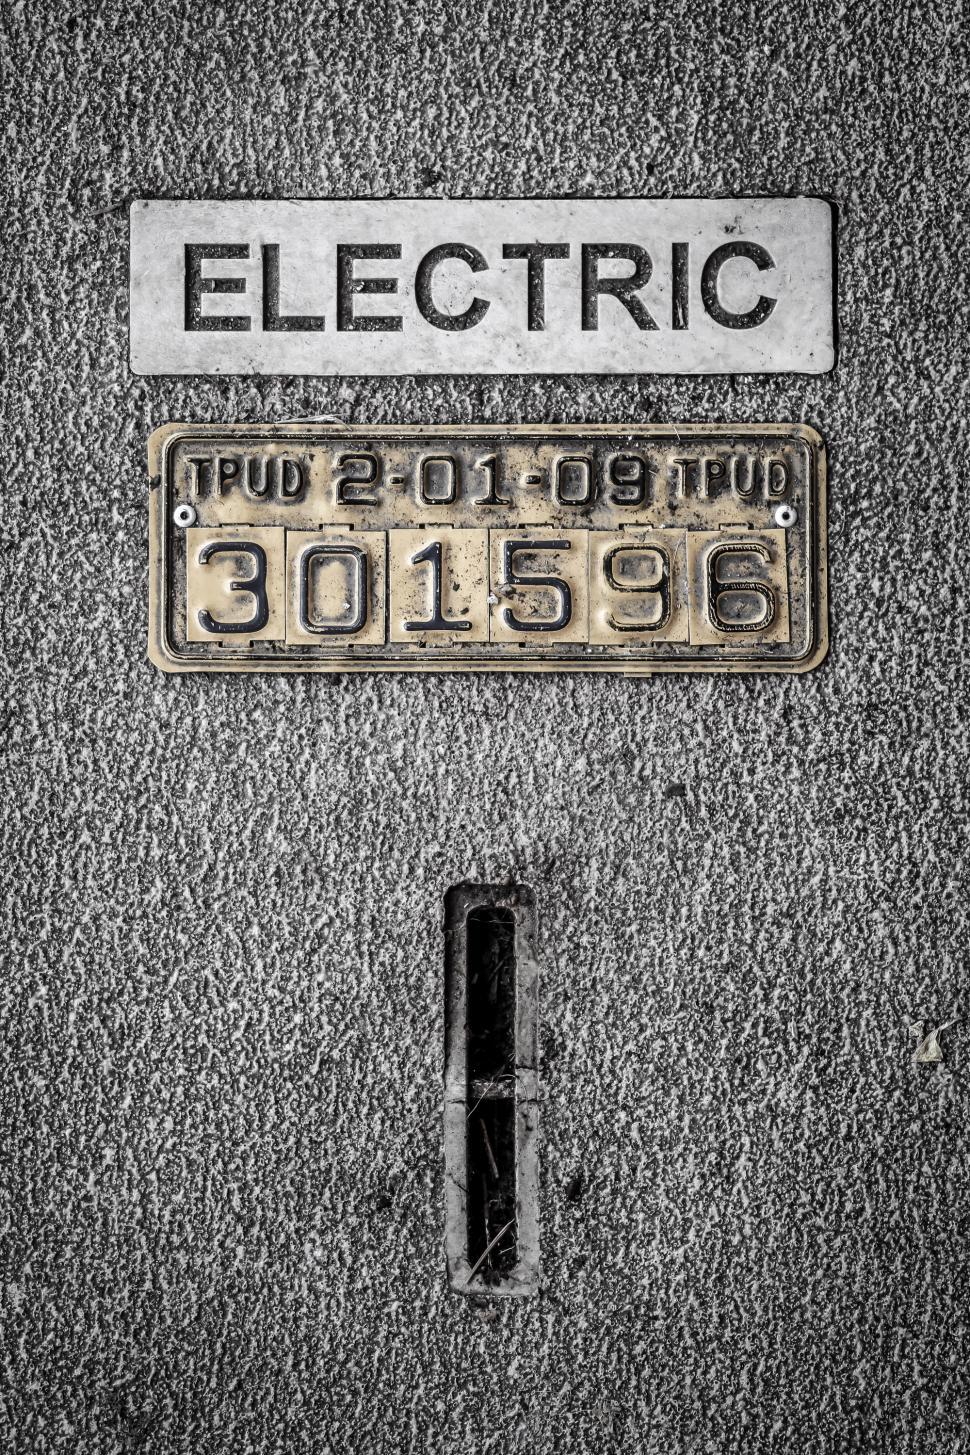 Free Image of Electric Meter Cover 